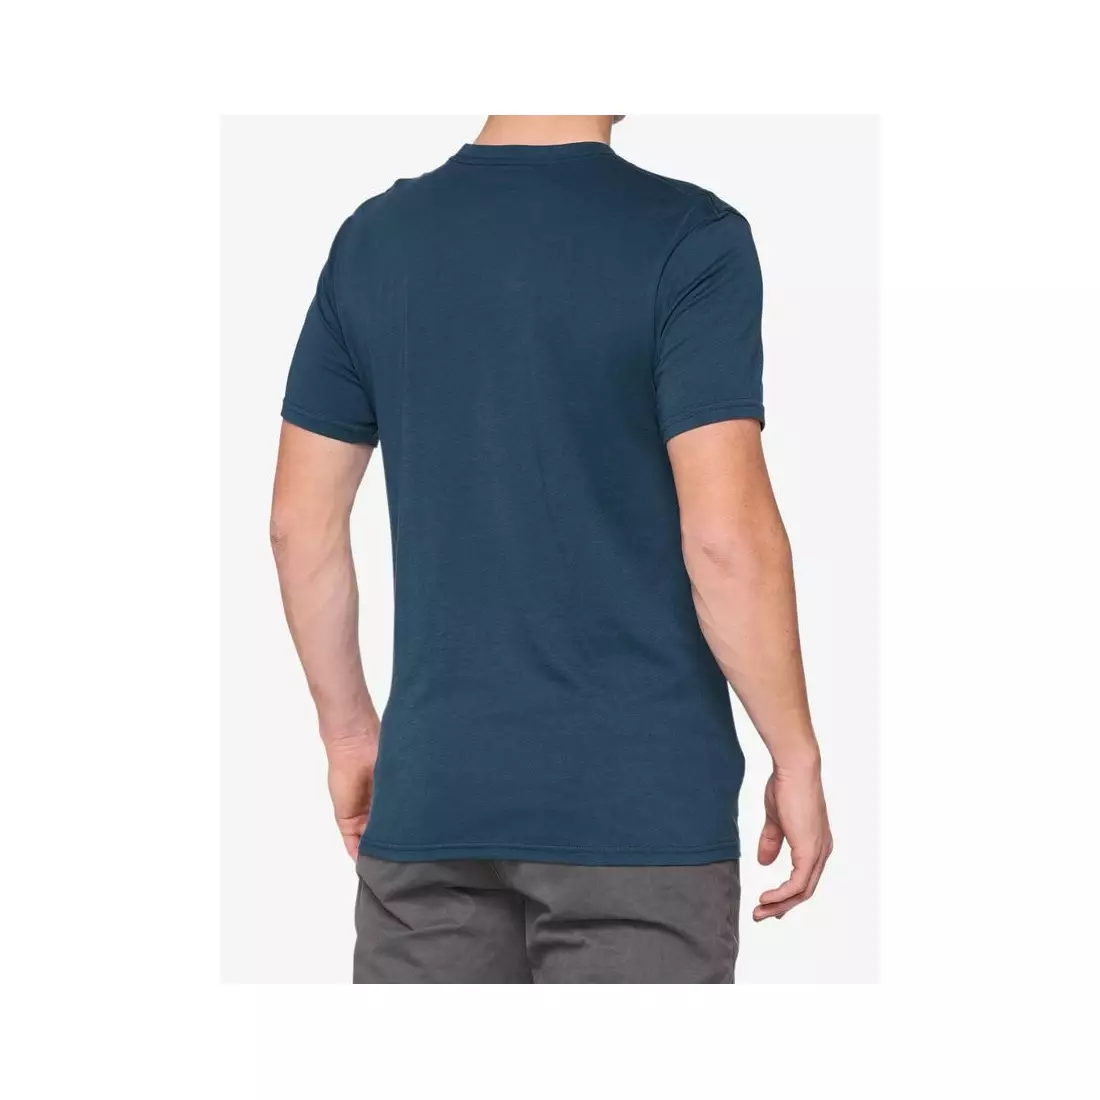 100% men's sports t-shirt with short sleeves NORD slate blue STO-32124-182-13